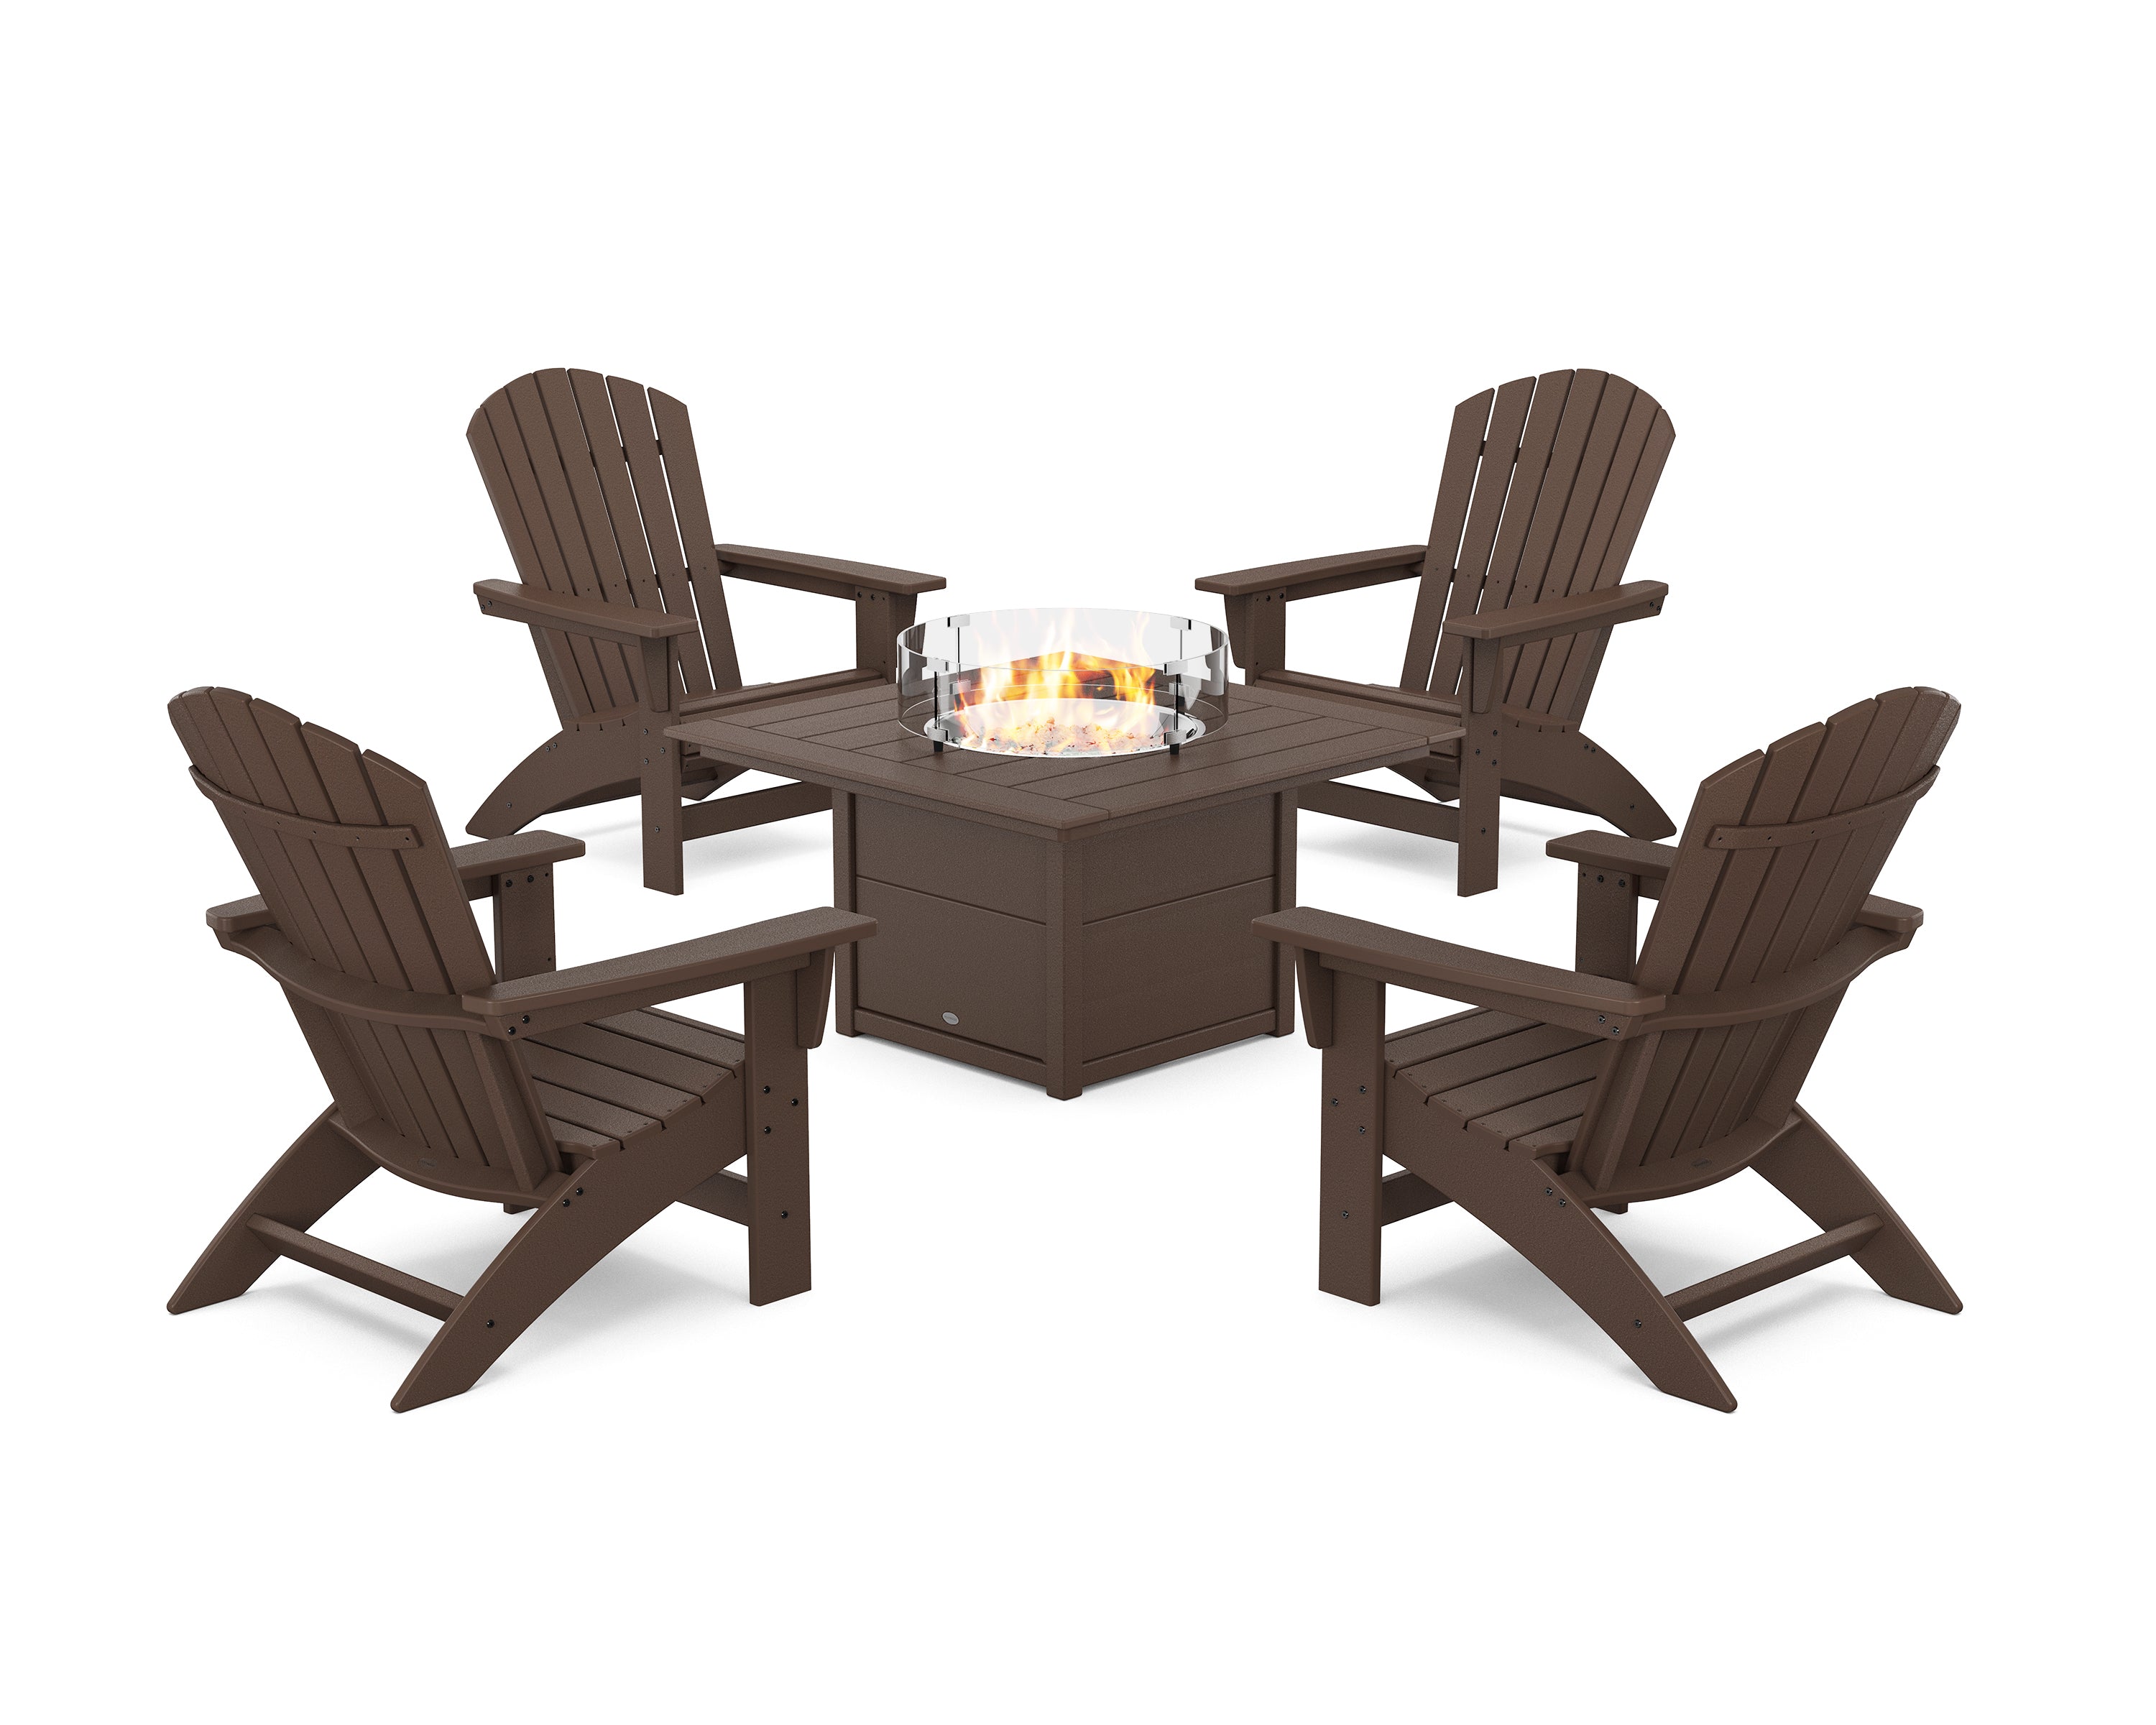 POLYWOOD® 5-Piece Nautical Grand Adirondack Conversation Set with Fire Pit Table in Mahogany